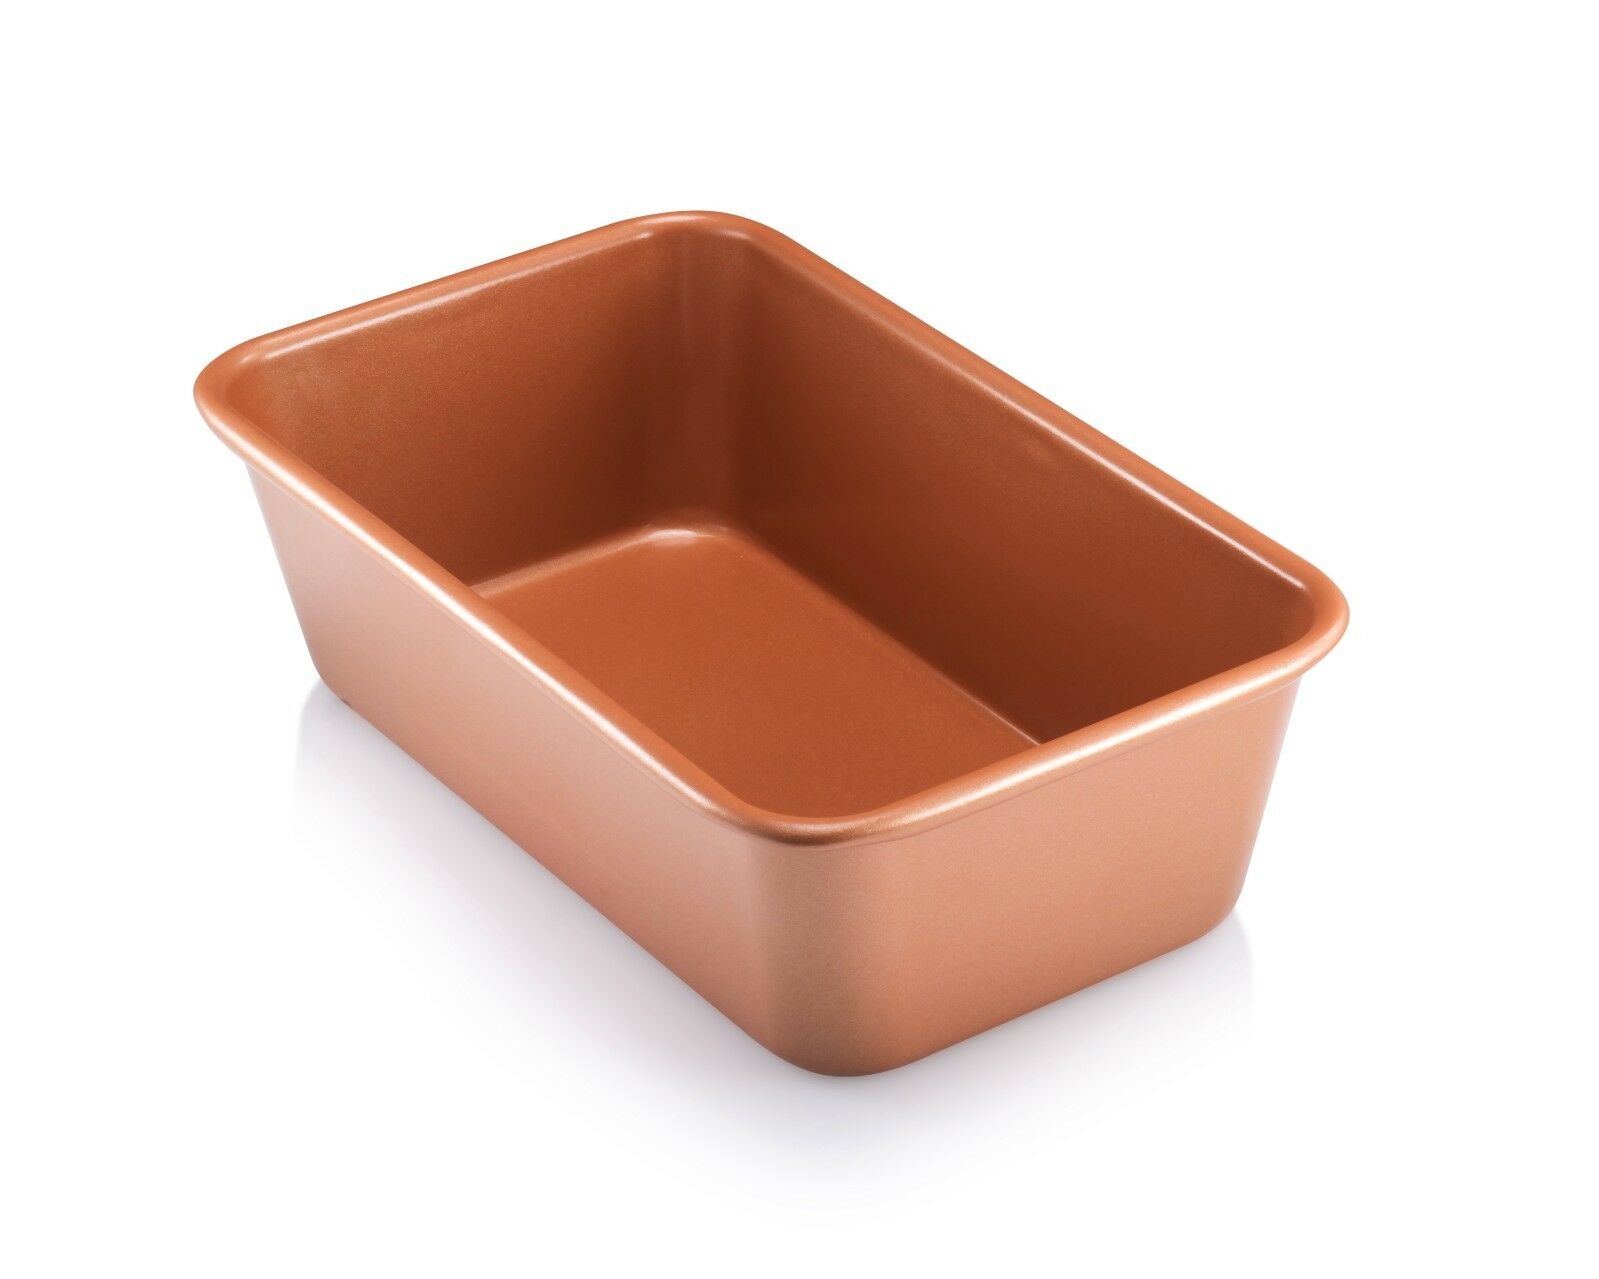 Gotham Steel Bakeware Copper Loaf Baking Pan Non Stick - 9.7" X 5.75"  - New!